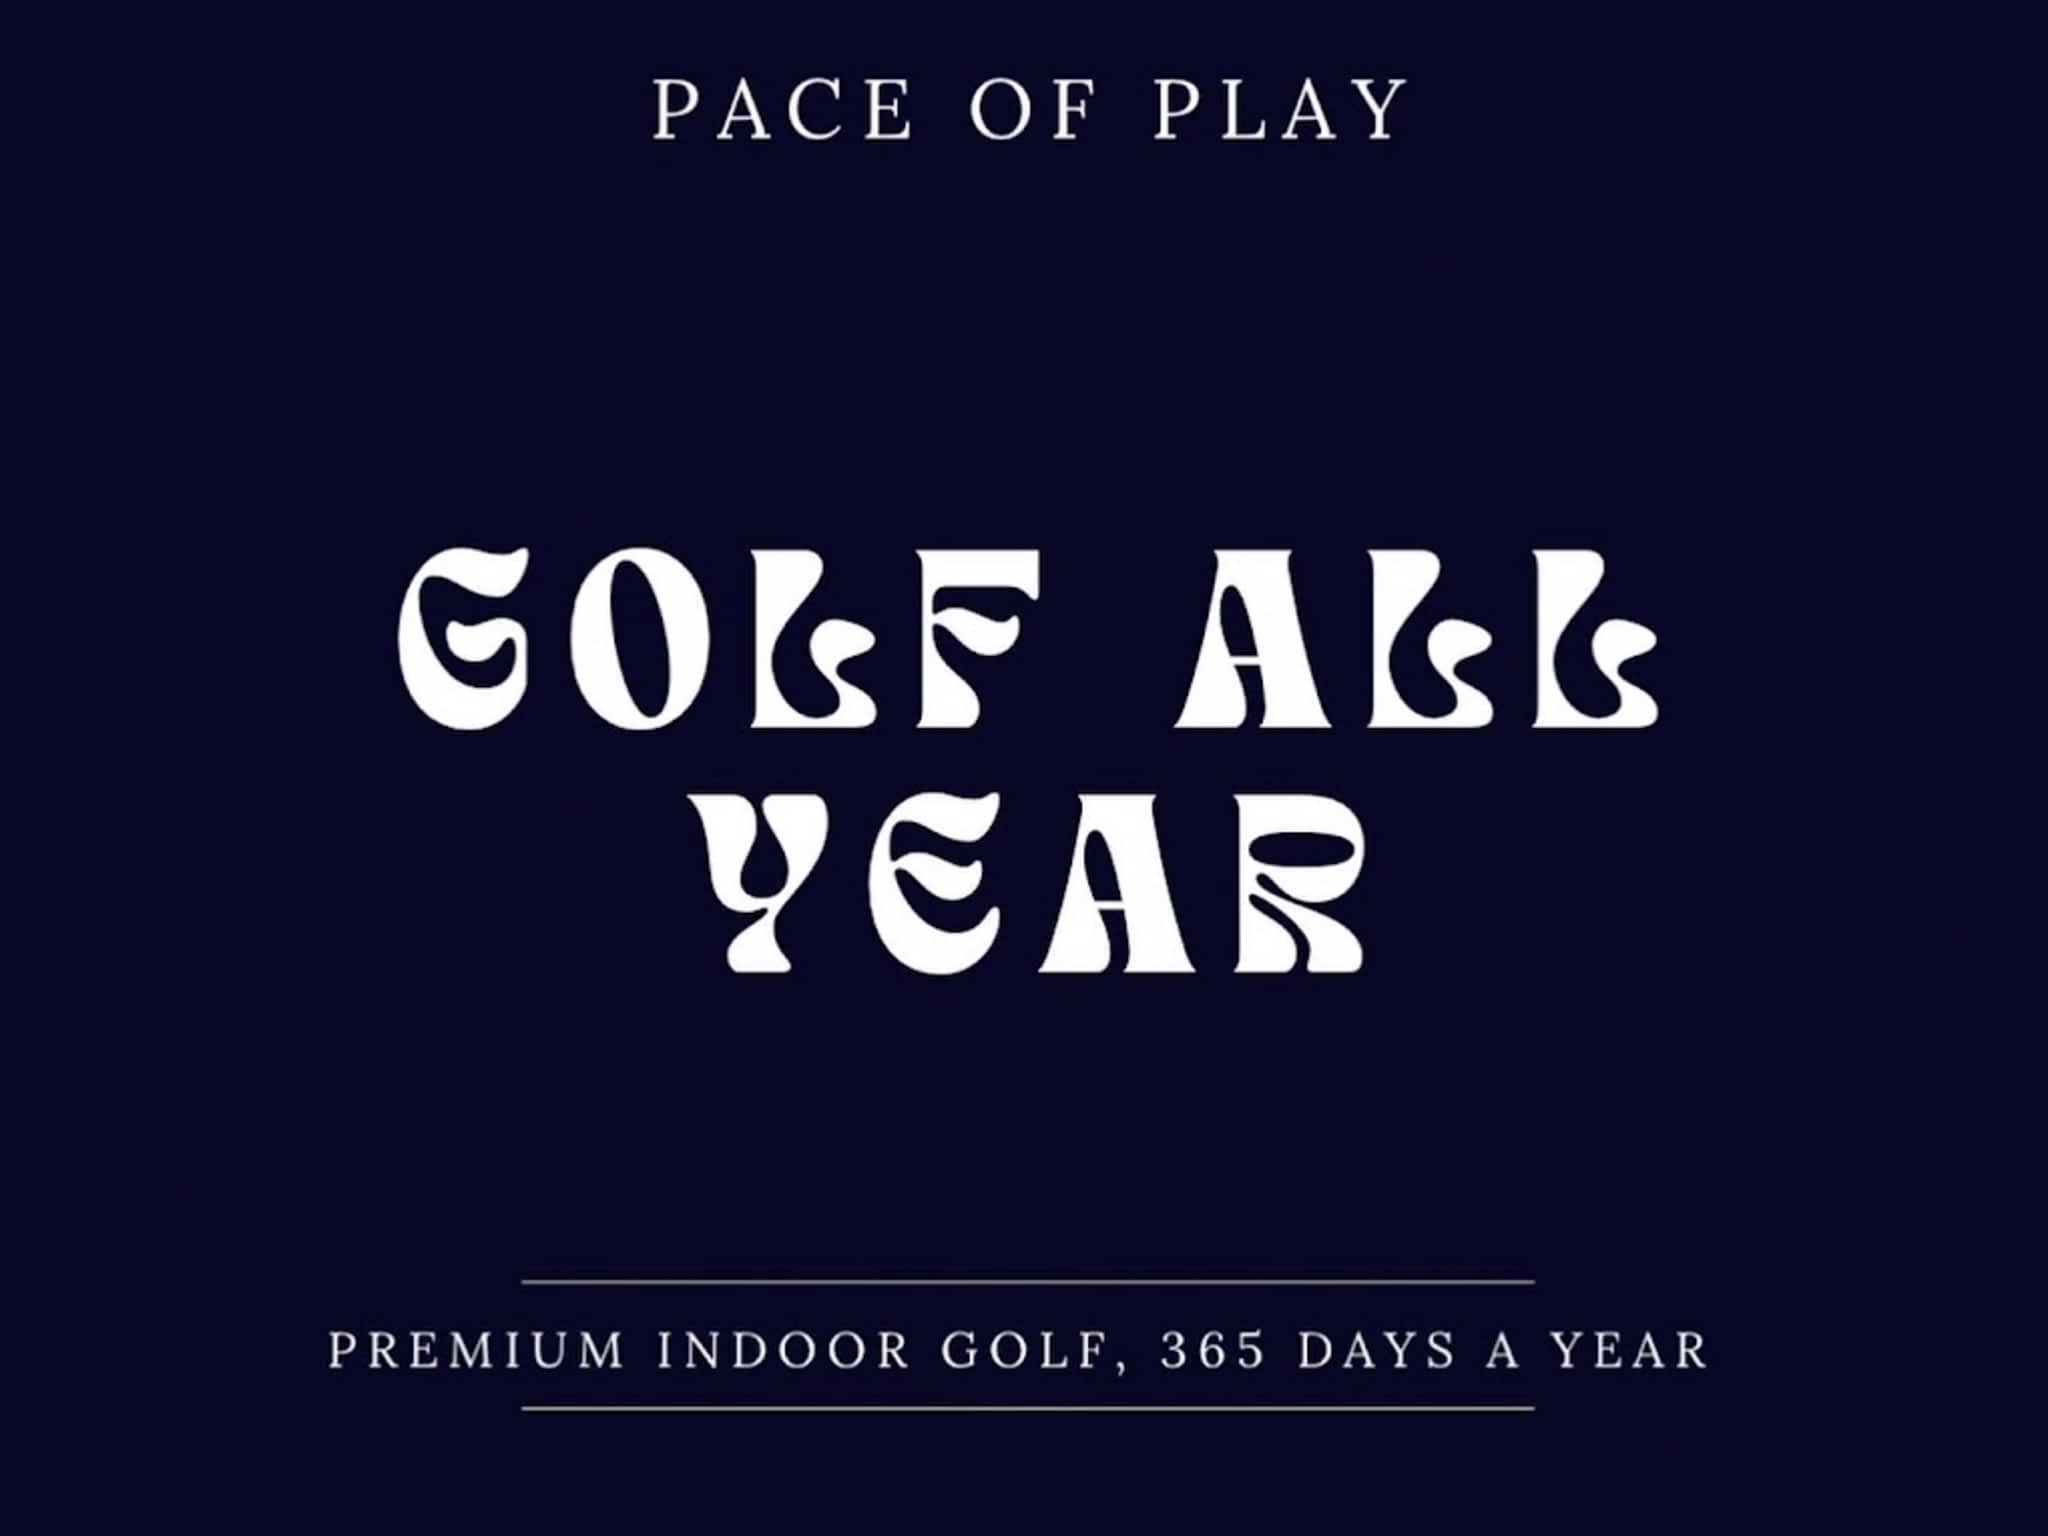 photo Pace of Play - Indoor Golf